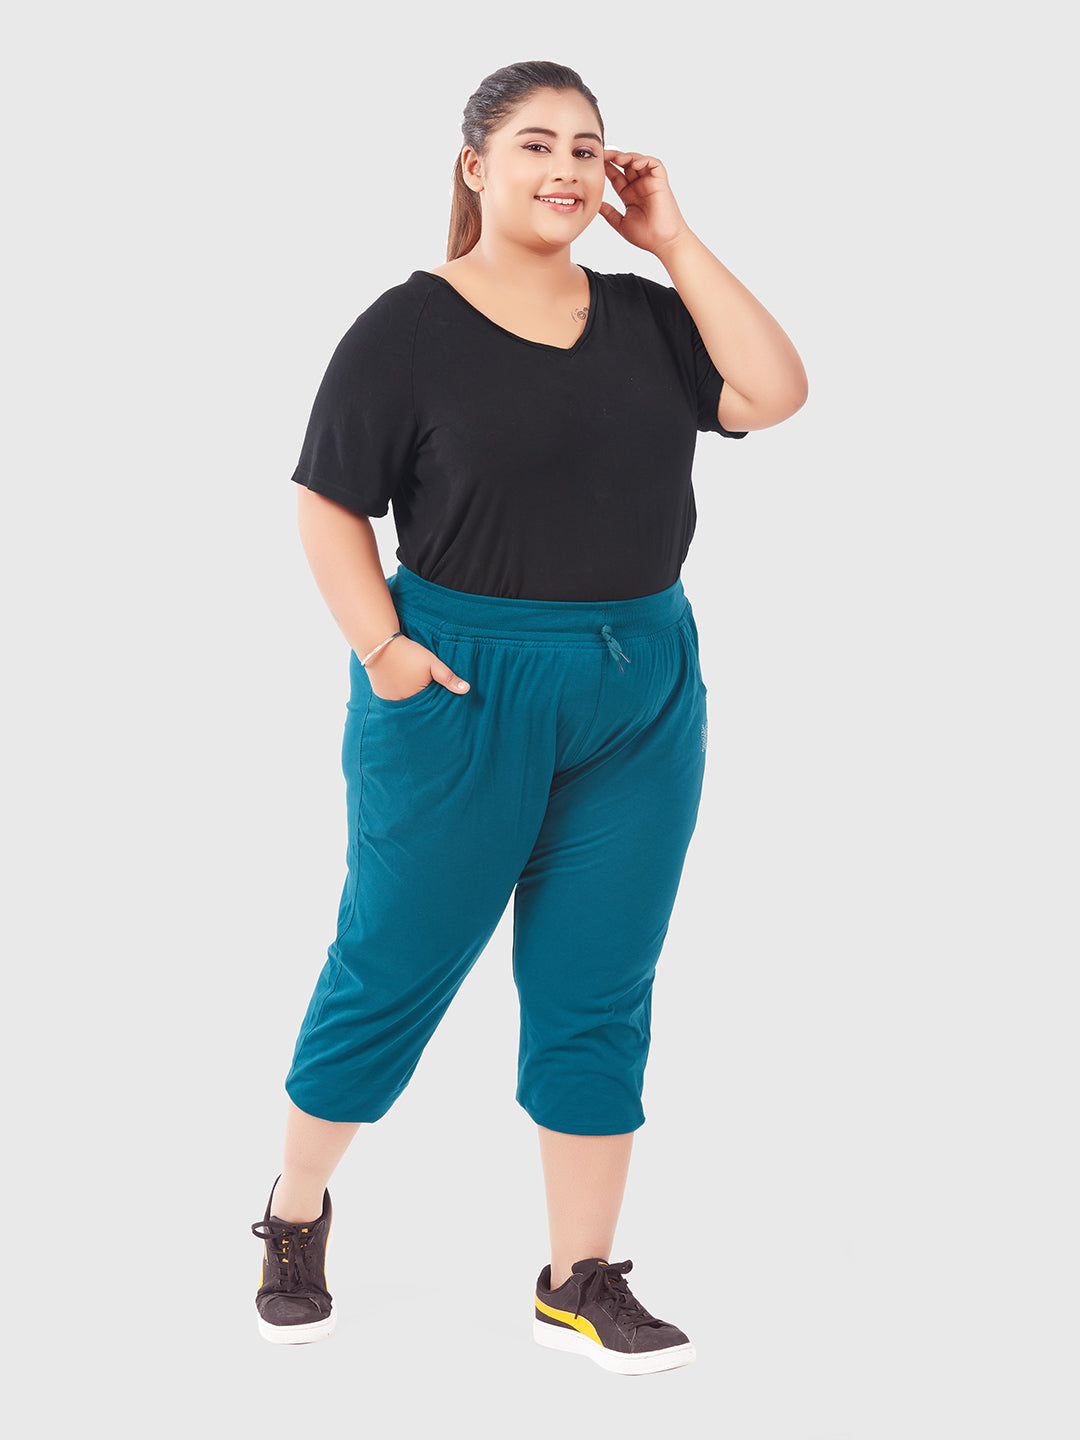 Stylish Teal Blue Cotton Half Capris For Women online in India